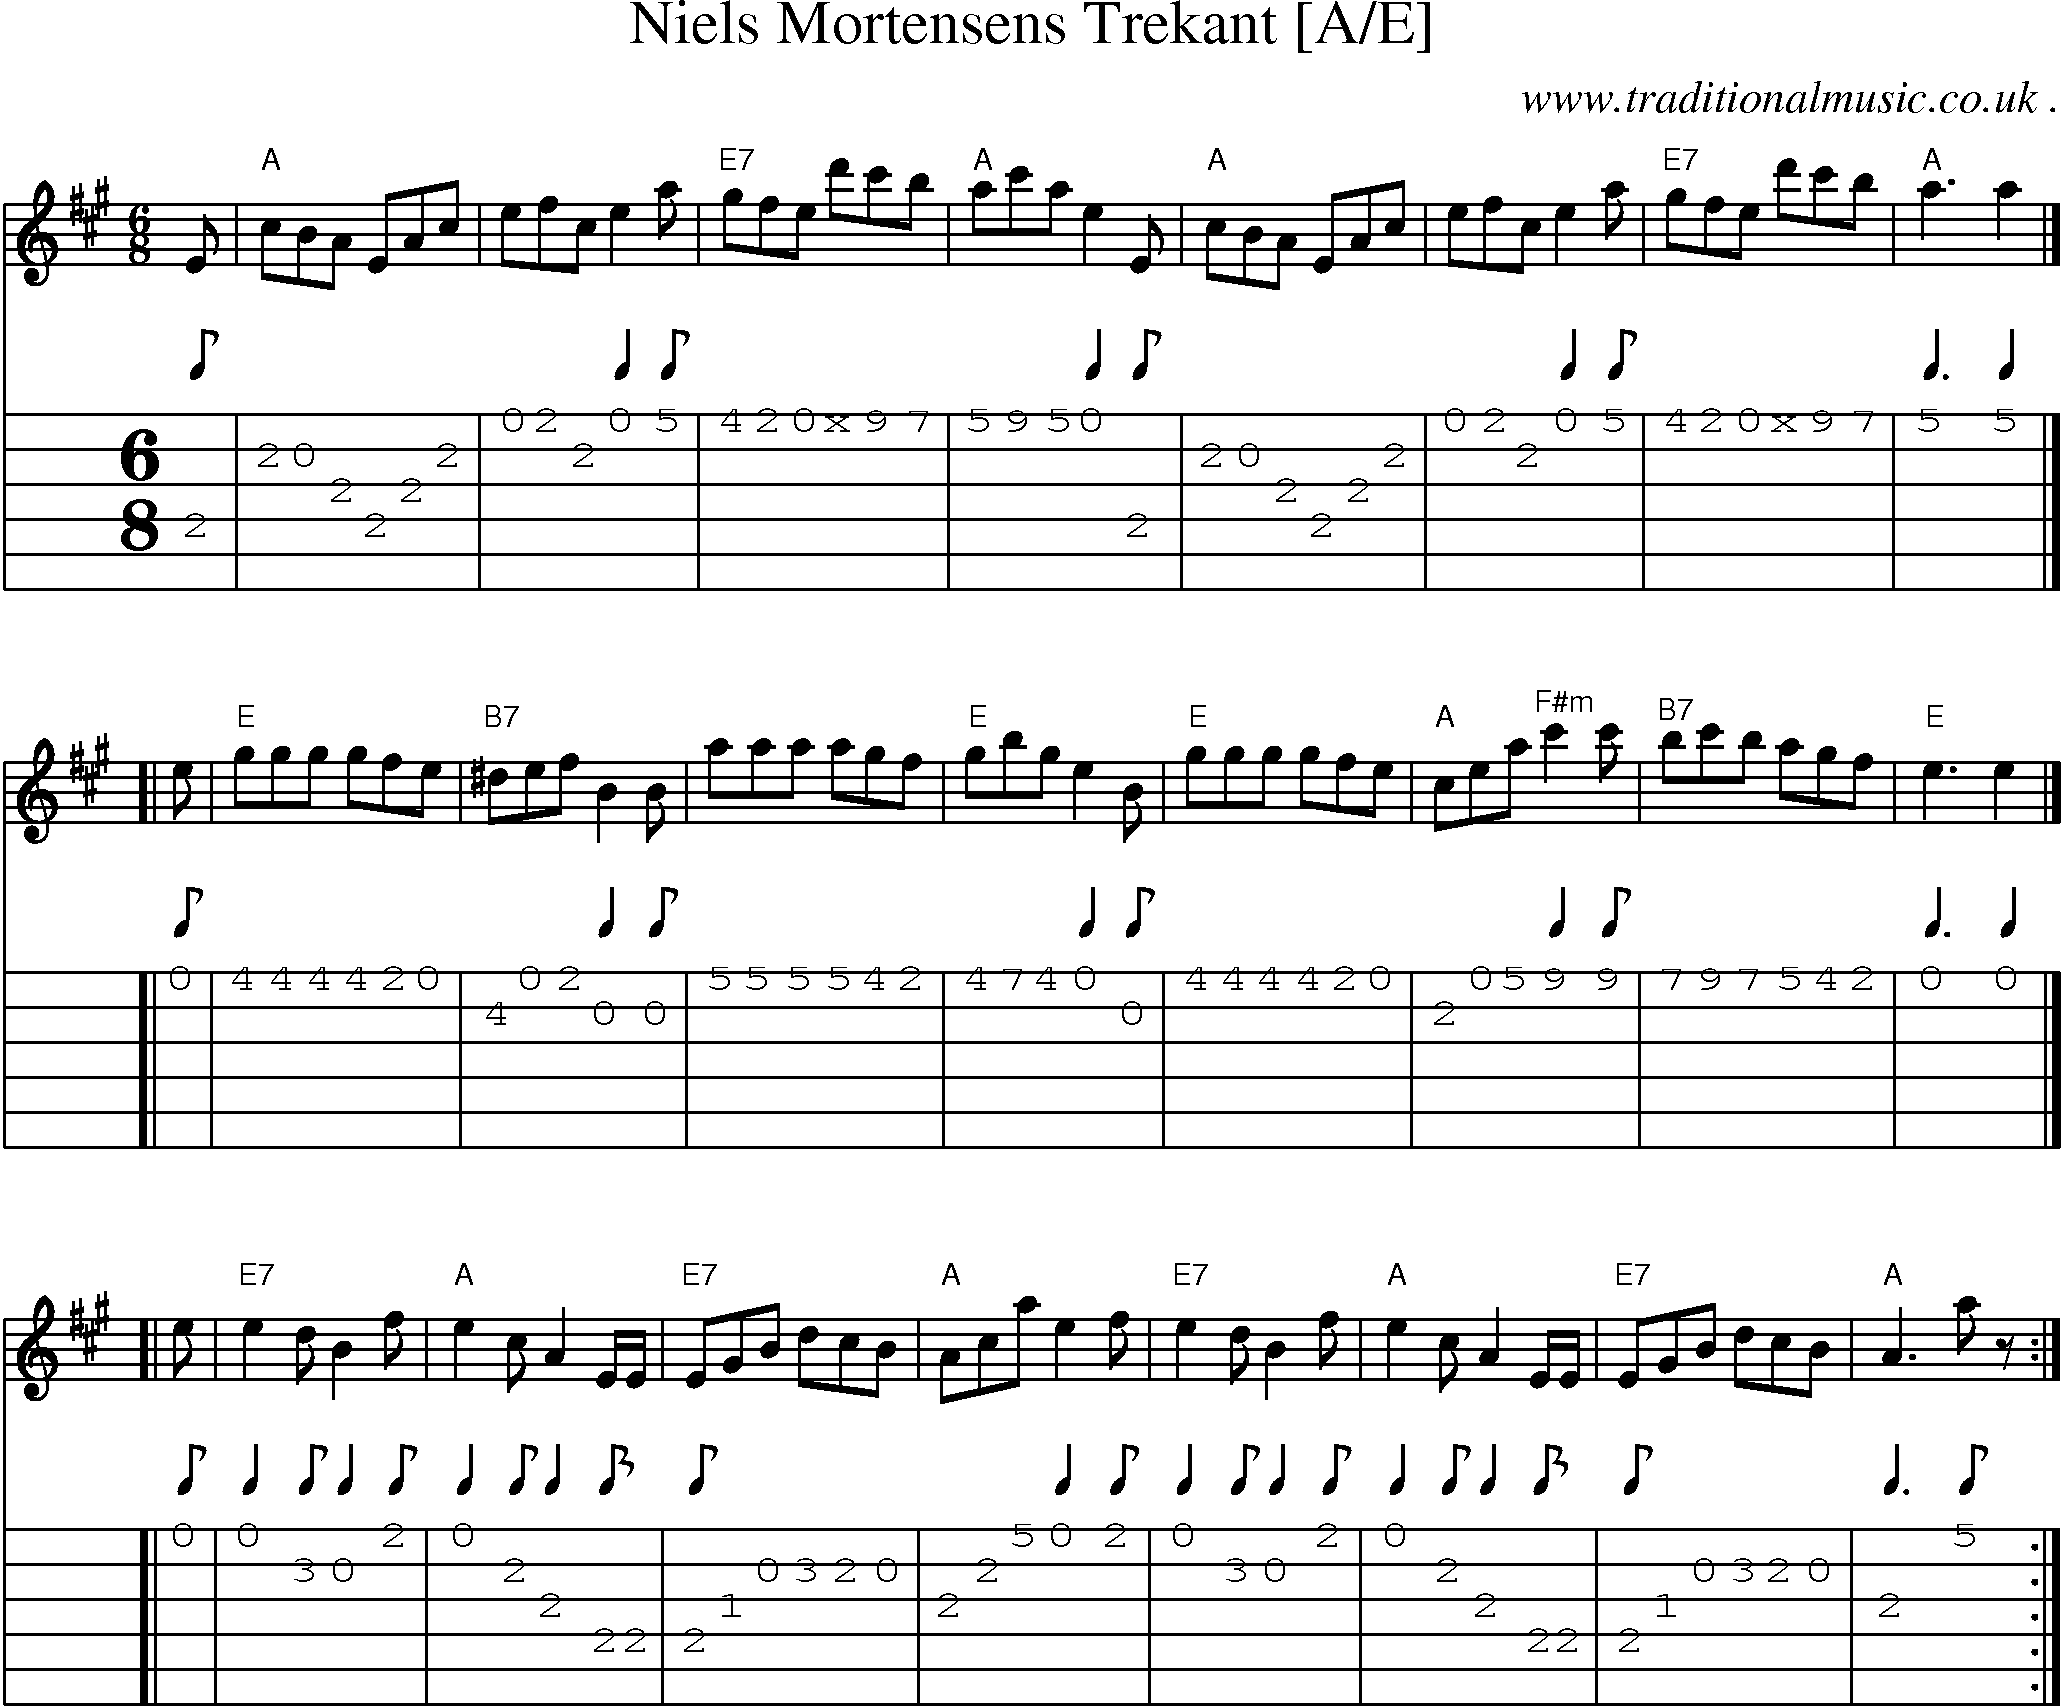 Sheet-music  score, Chords and Guitar Tabs for Niels Mortensens Trekant [ae]